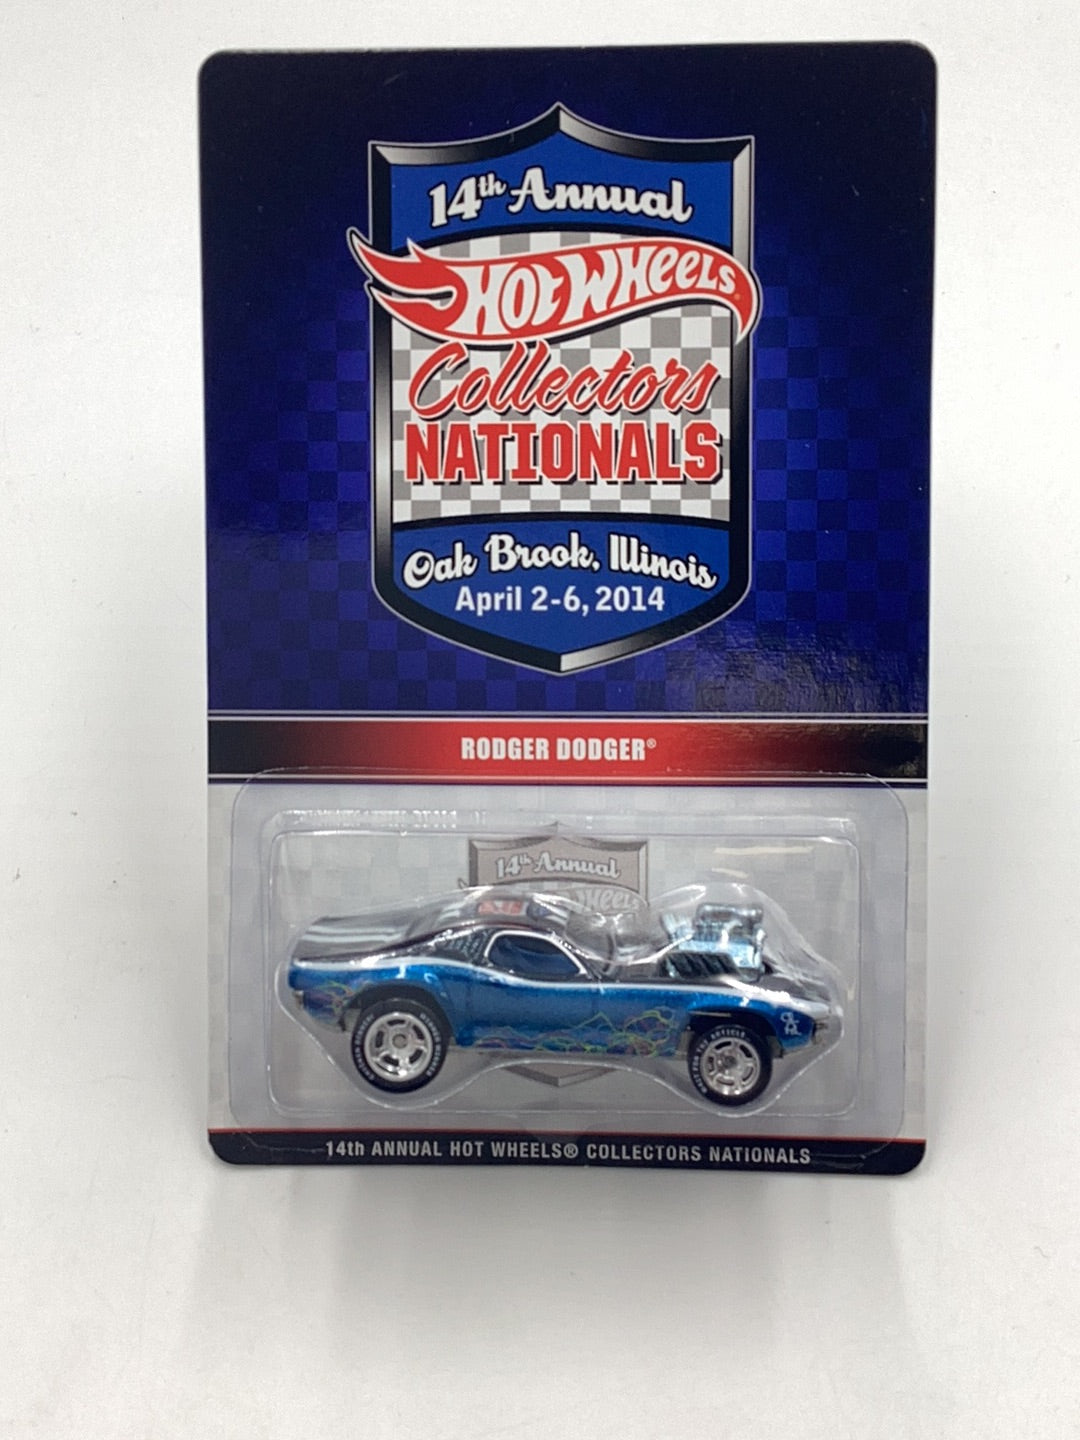 Hot Wheels 14th annual collectors nationals Rodger Dodger 1025/2000 with protector